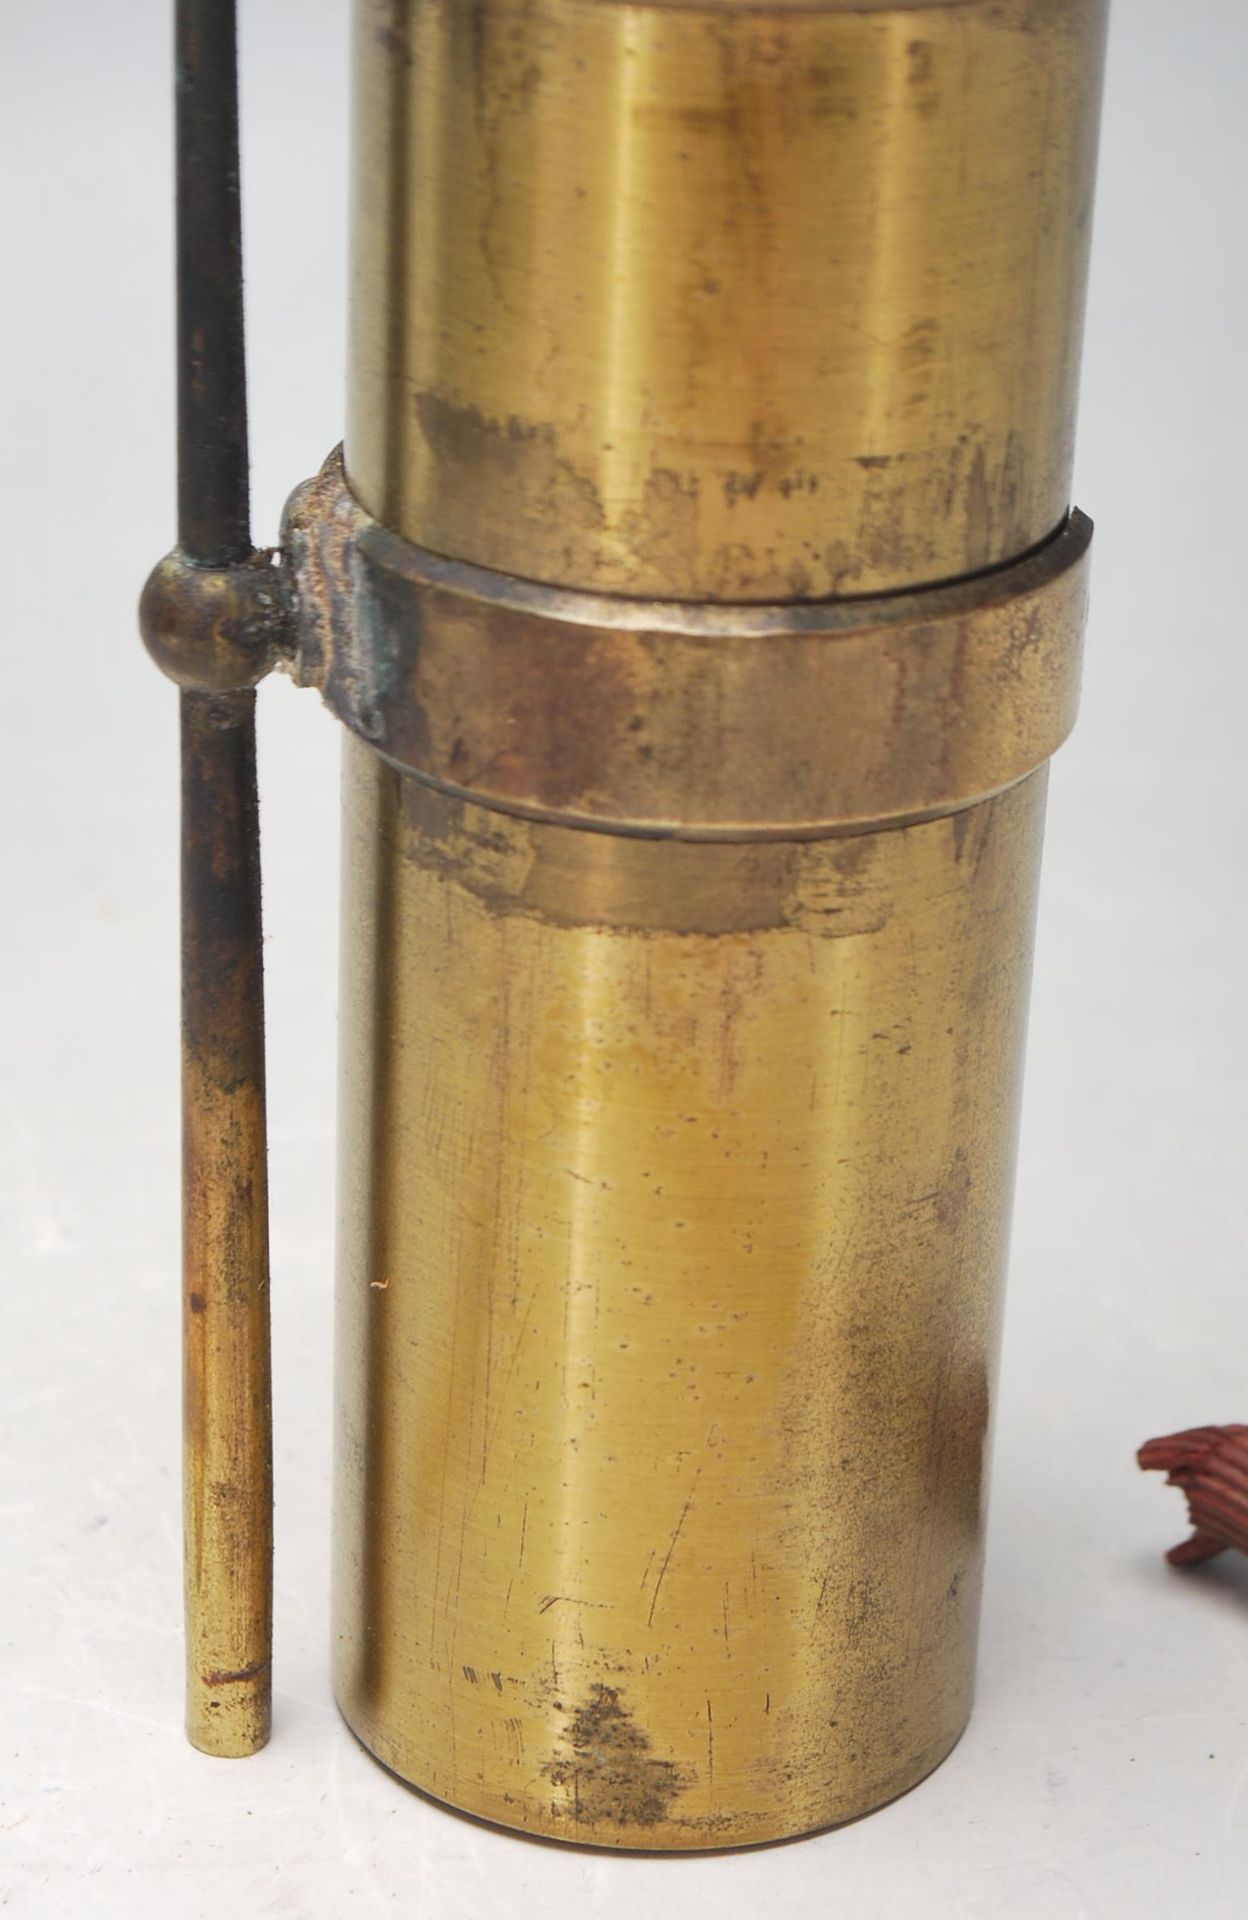 A VINTAGE 20TH CENTURY BRASS BLOW LAMP / JEWELLERY BLOW LAMP BY MOORE AND WRIGHT - Image 3 of 5